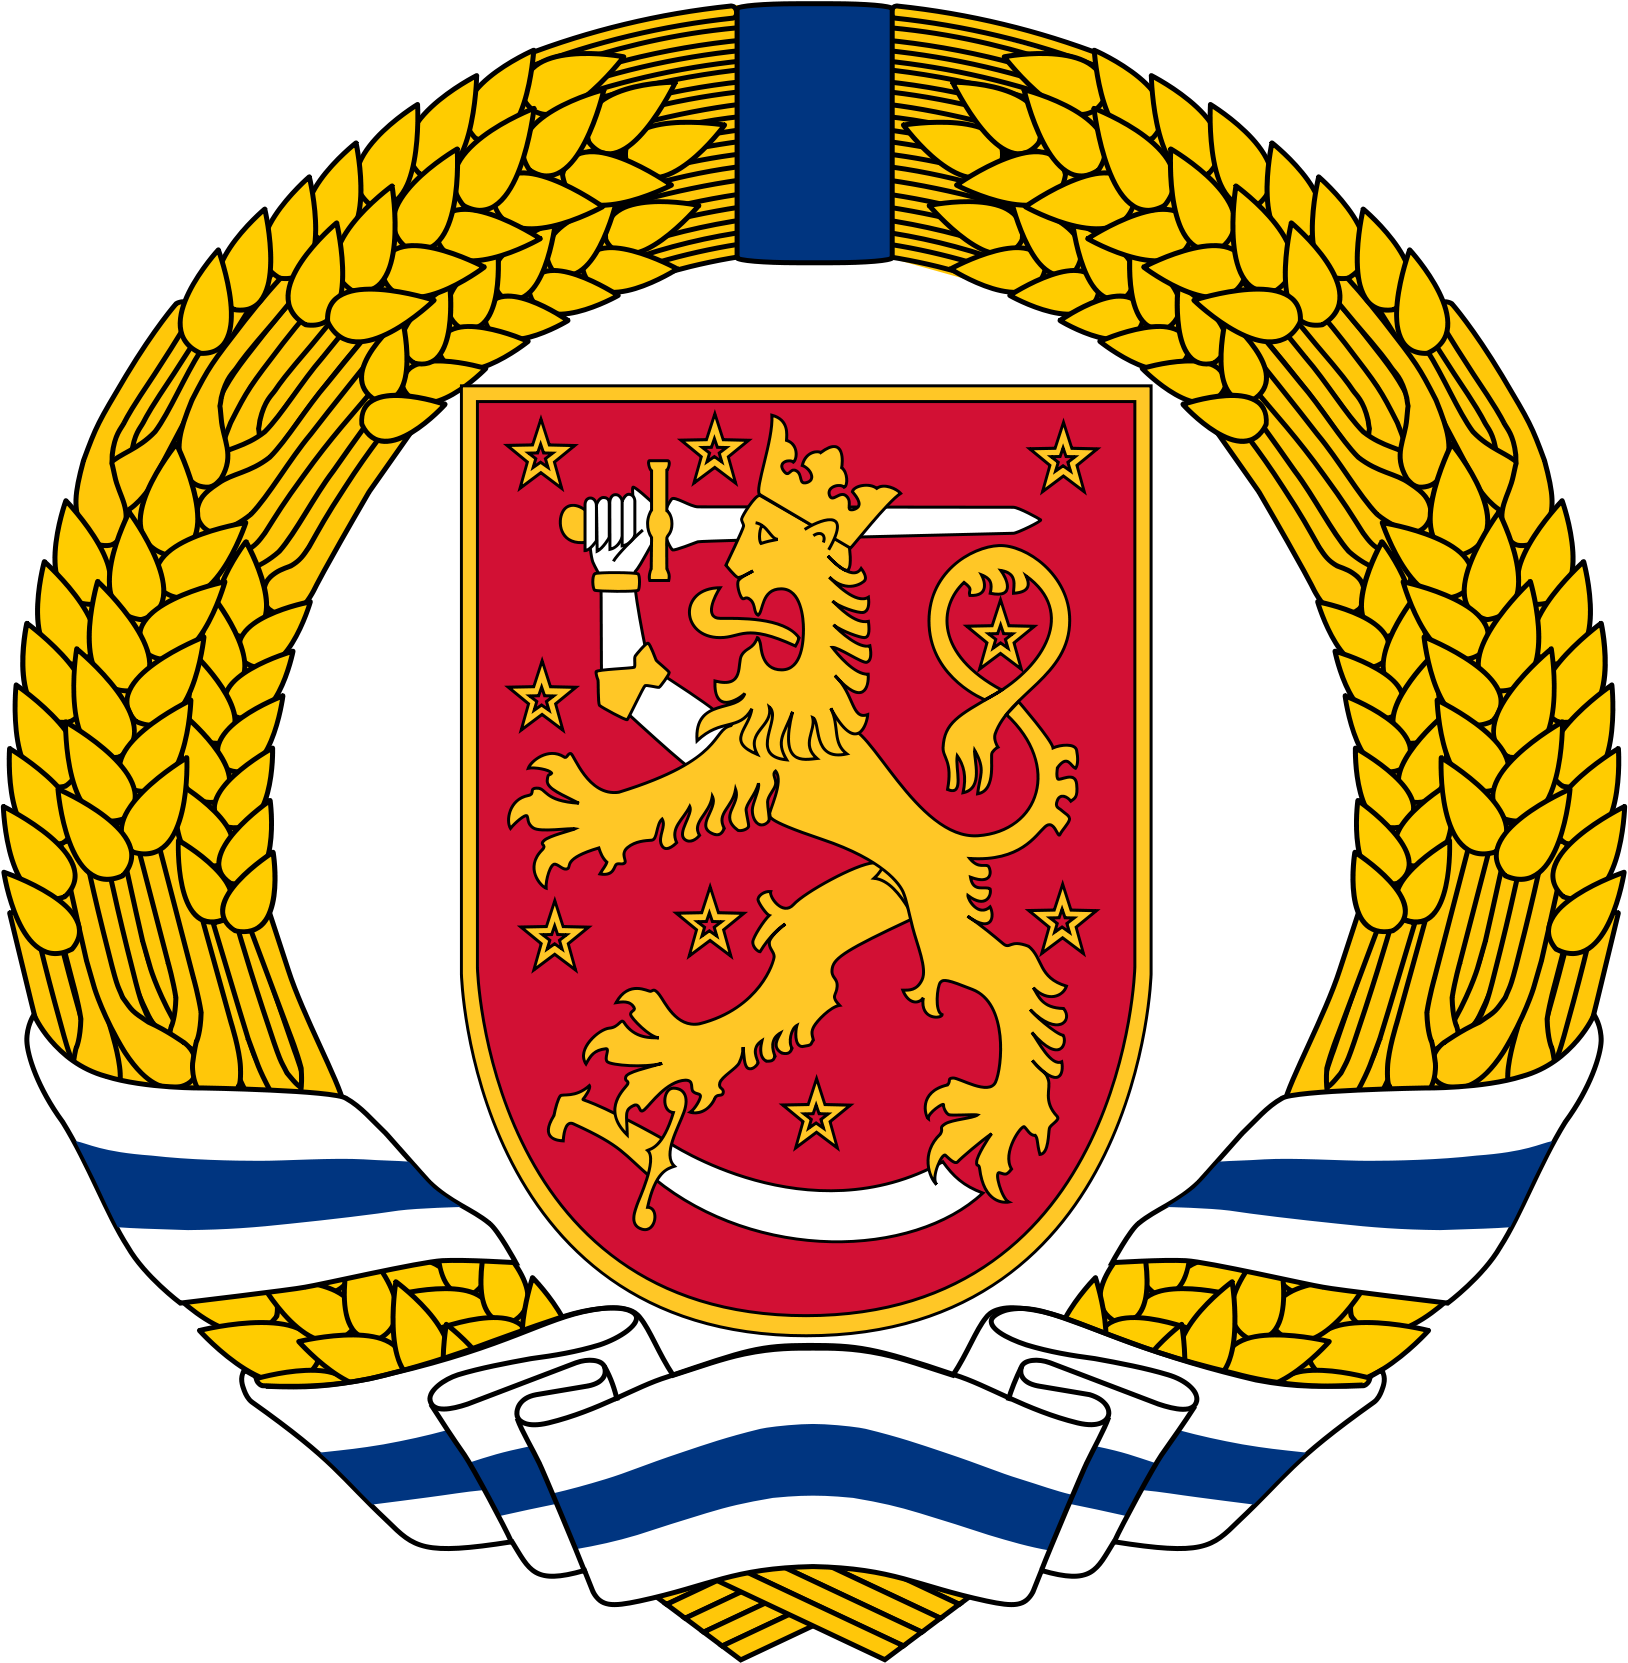 Finnish Emblem - Google Search - Finland Coat Of Arms (1628x1663)